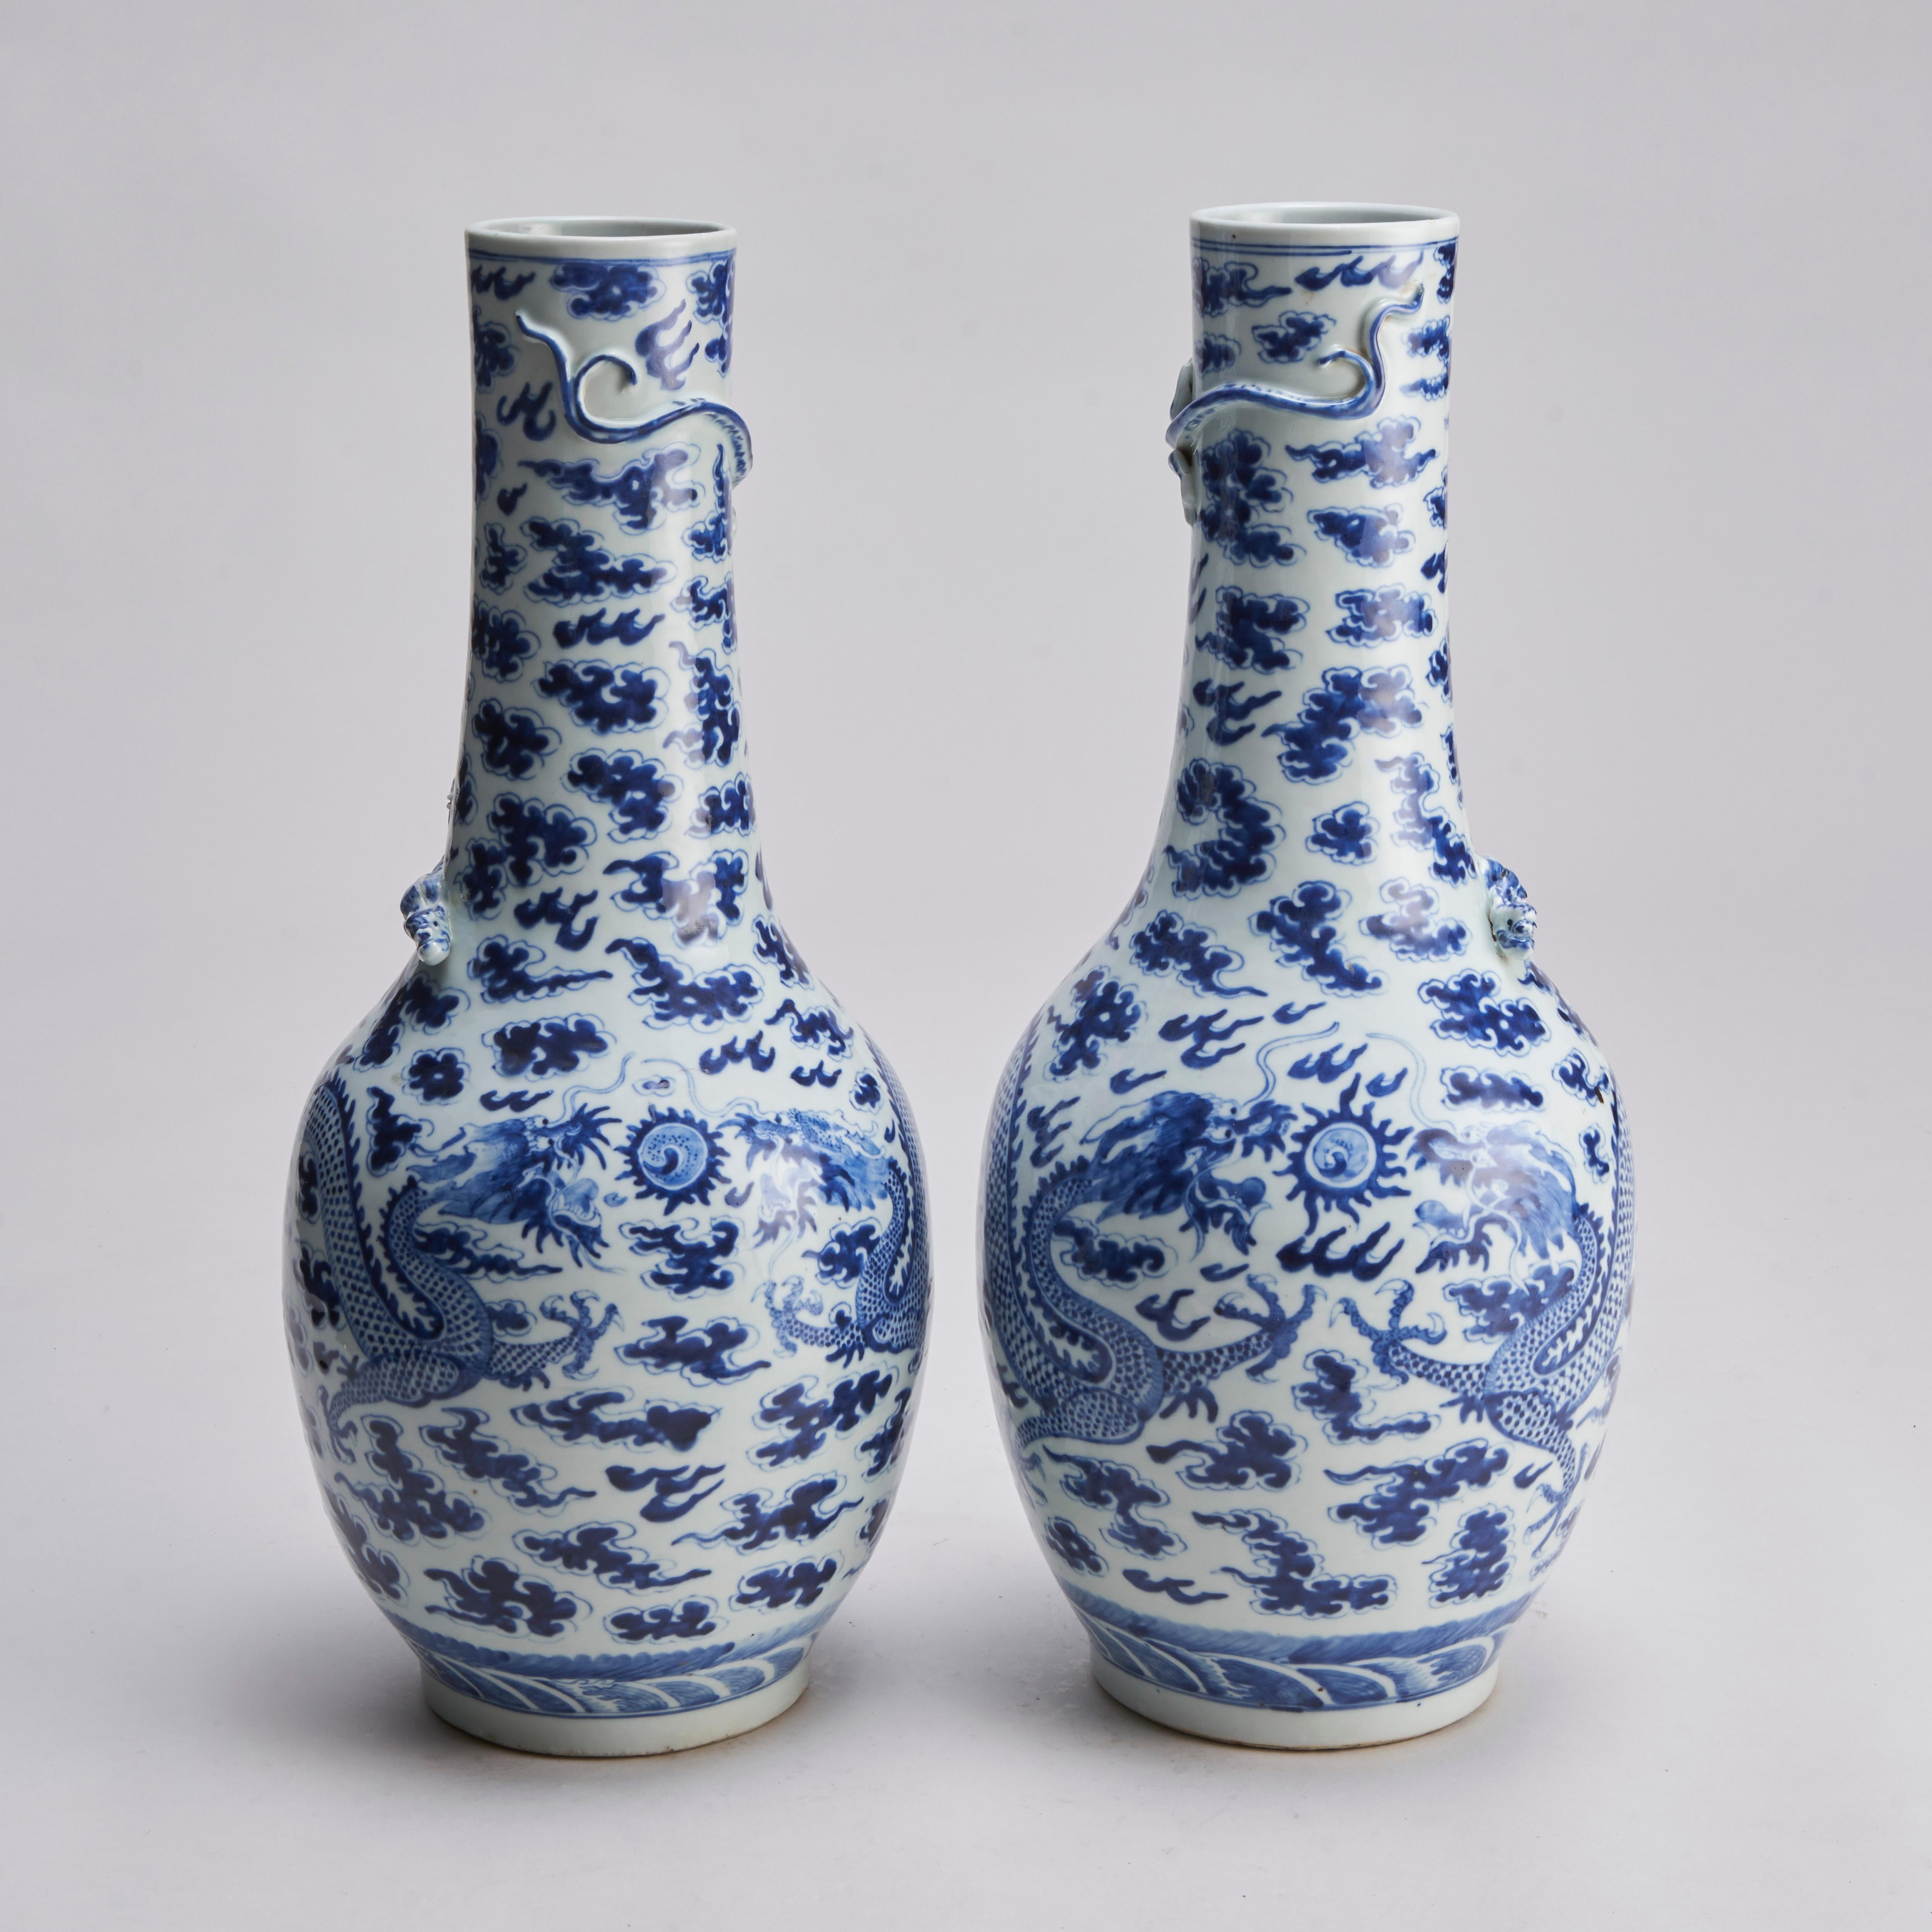 From our collection of antique Chinese porcelain, a pair of 19th century blue and white bottle vases with decoration of dragons among clouds. A lower border of rolling seas and moulded decoration of dragons to the neck.

Contact us for further